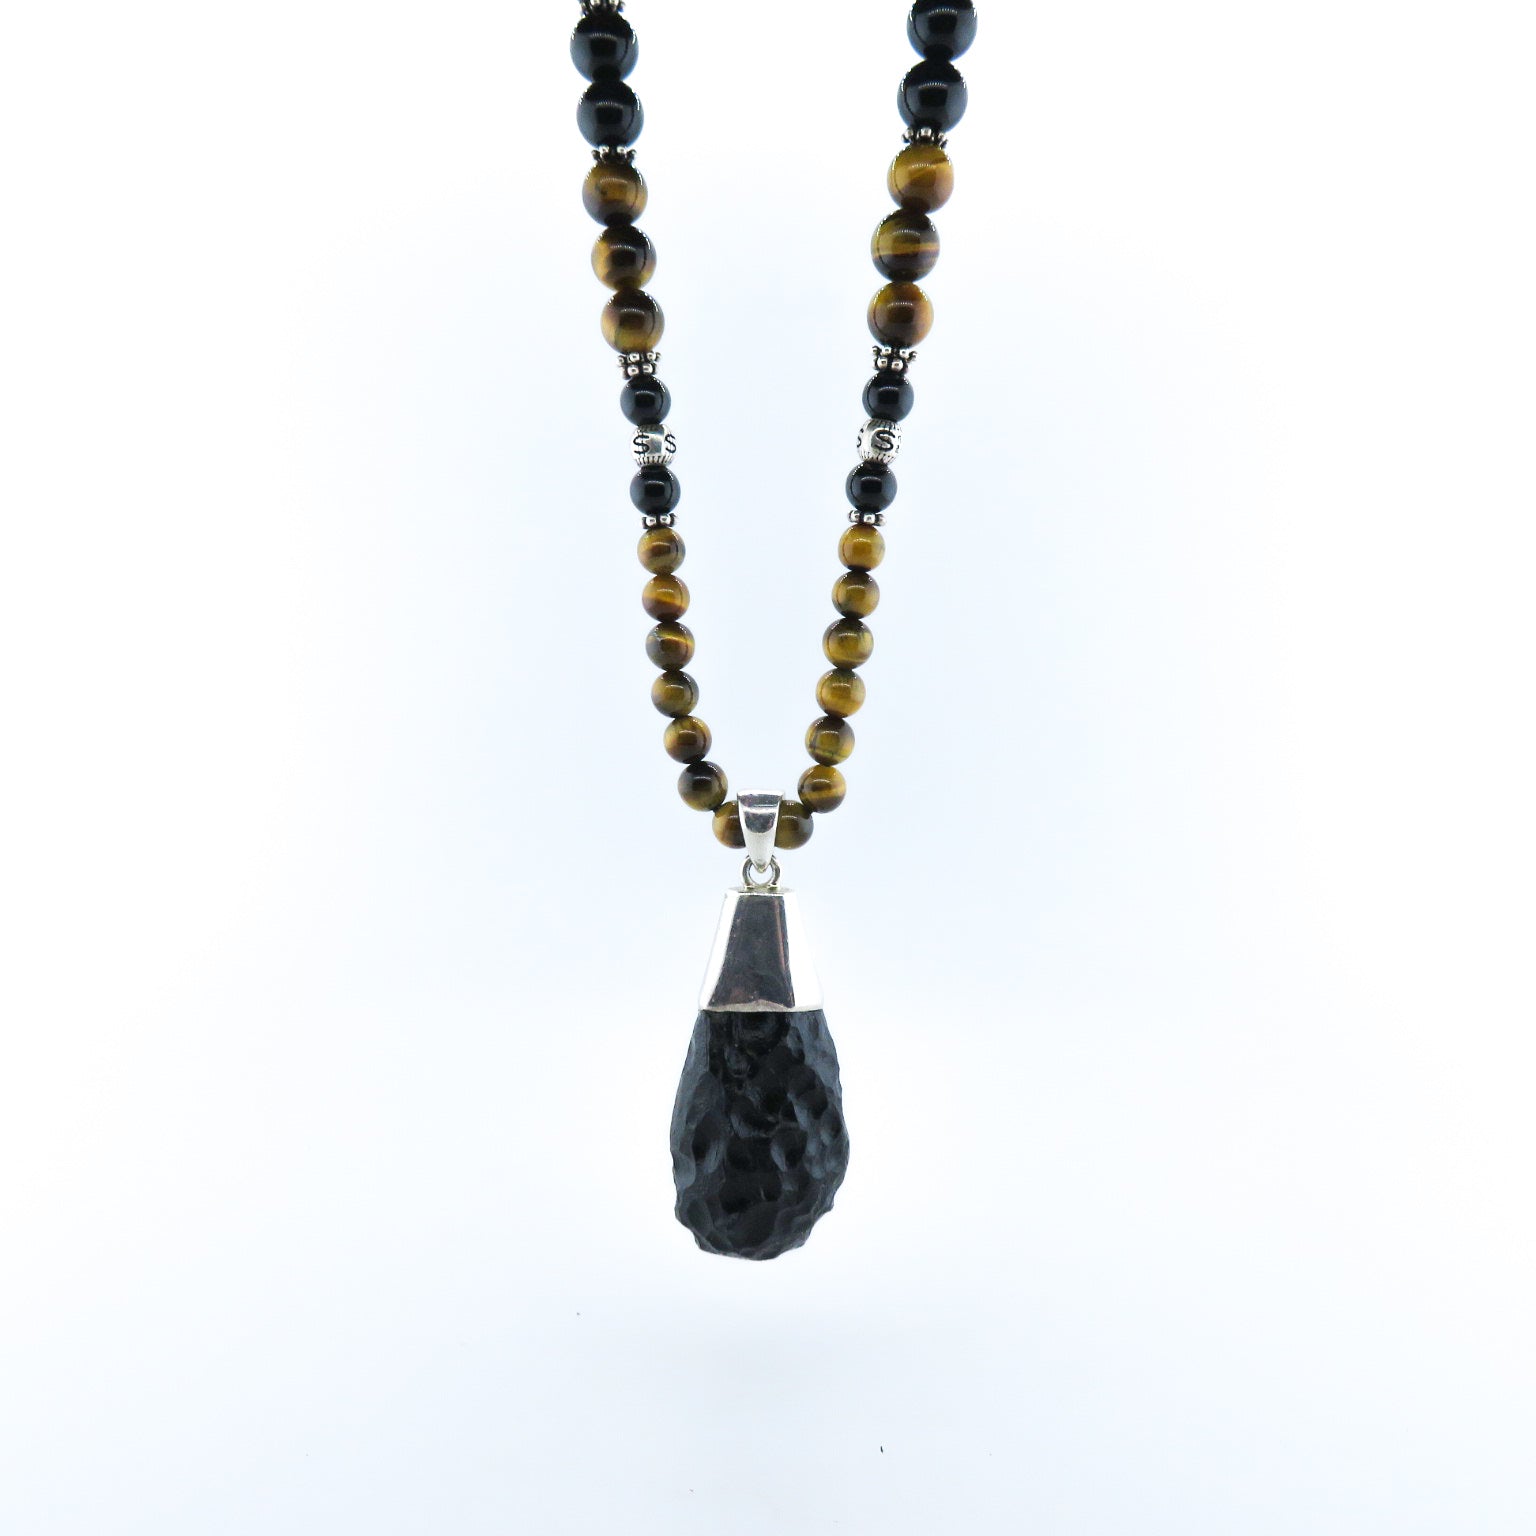 Tiger's Eye Necklace with Tektite (Meteorite), Black Onyx, Lava and Silver Beads